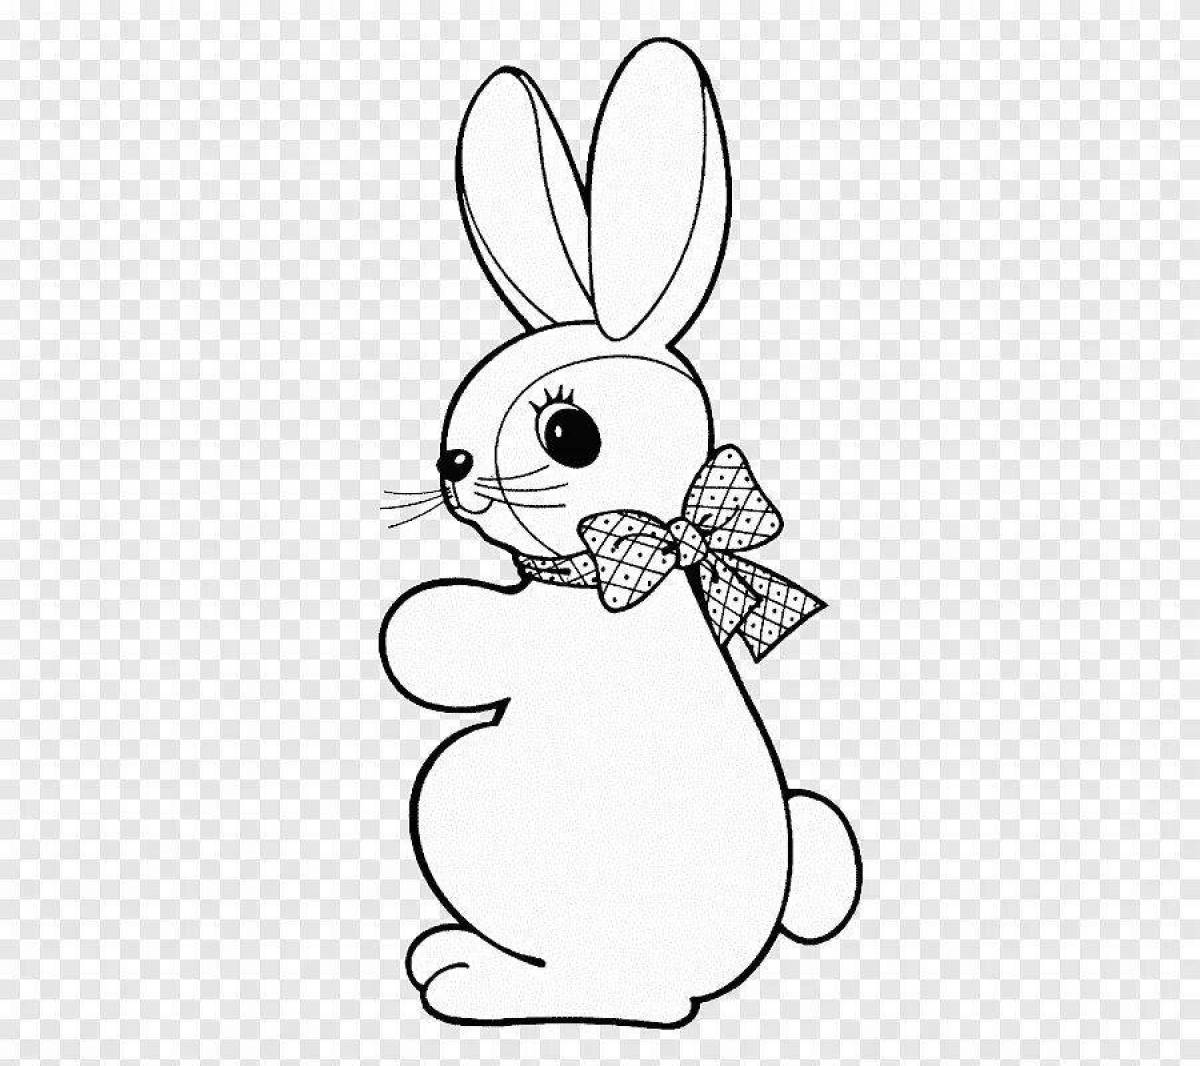 Wagging rabbit coloring page